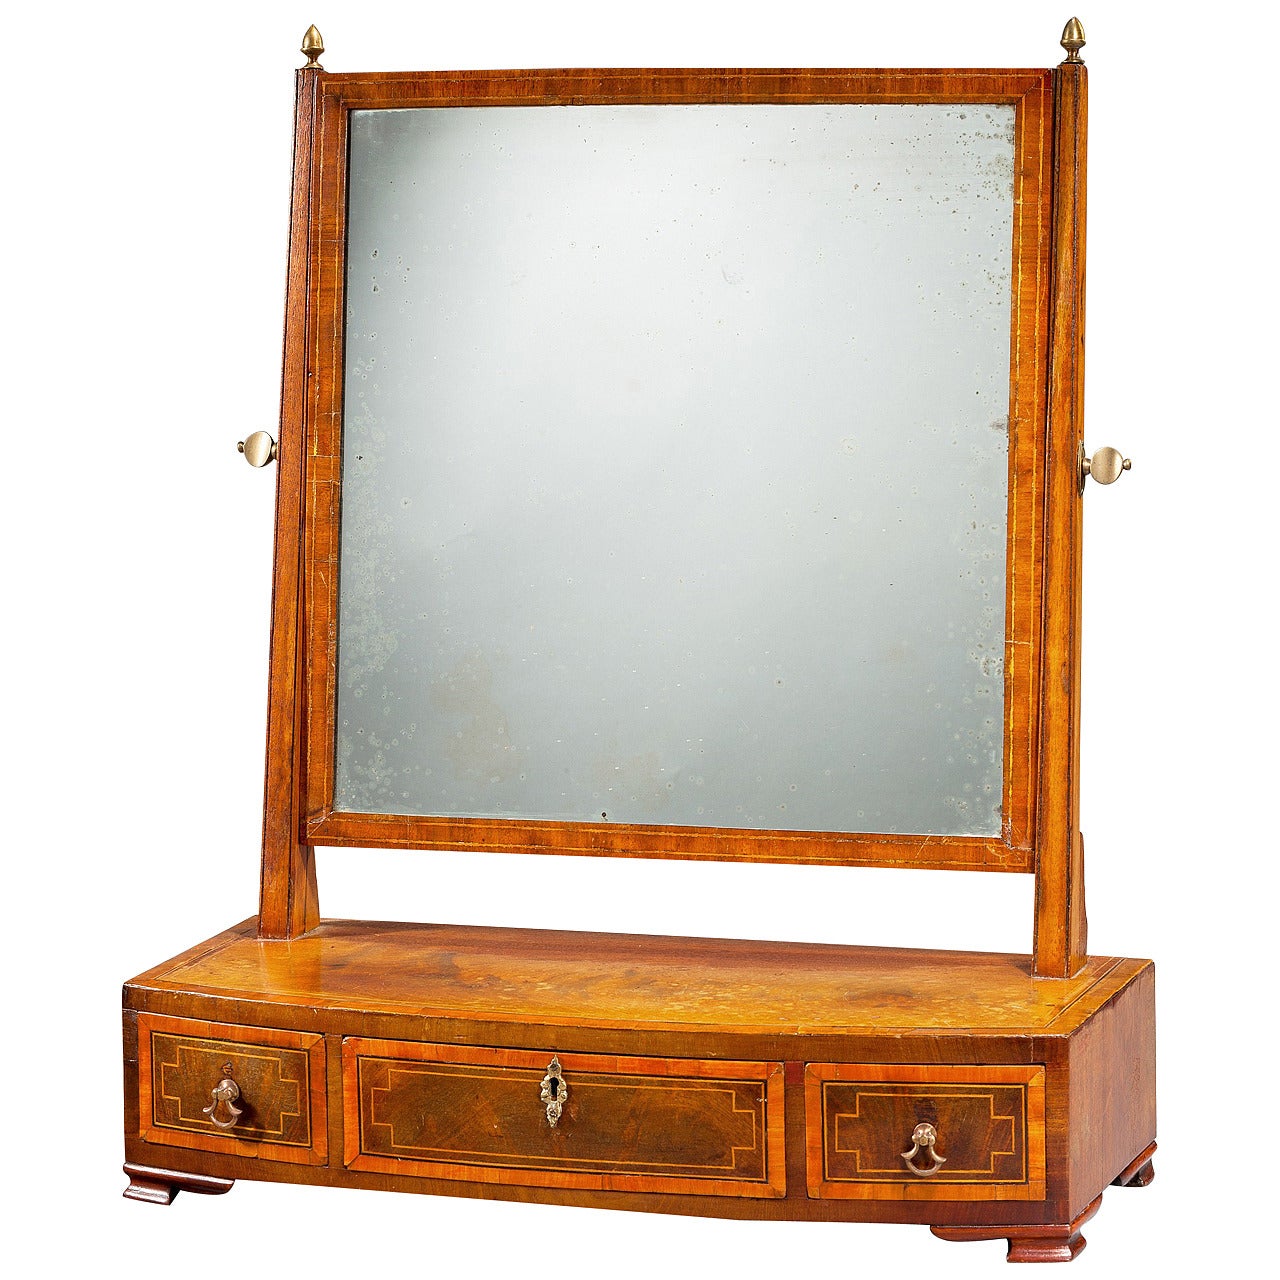 George III Period Bow Fronted Dressing Mirror